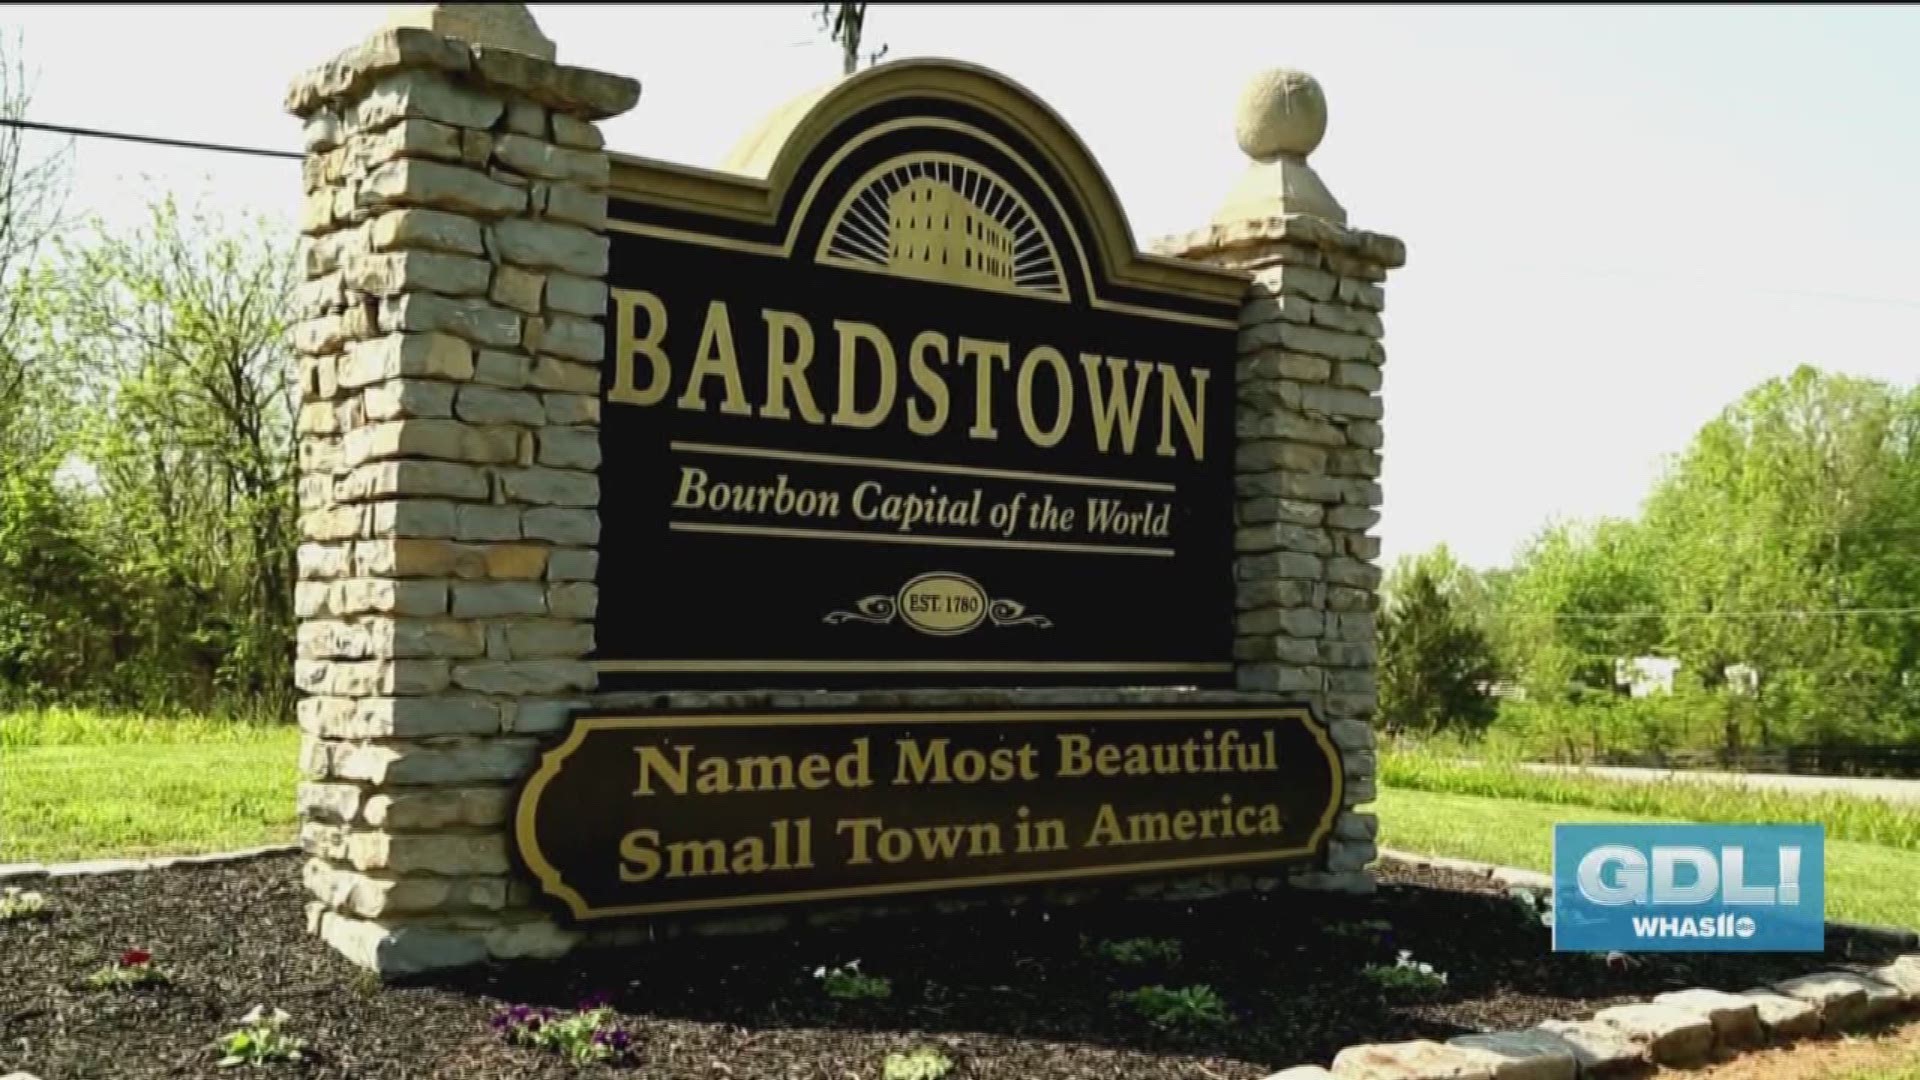 The picturesque Bardstown, Kentucky is a town rich in history, personality, and bourbon distilleries. 
But in the past 6 years it's become known for something more sinister -- murder. Now the unsolved murders of five people are the subject of a new podcast.